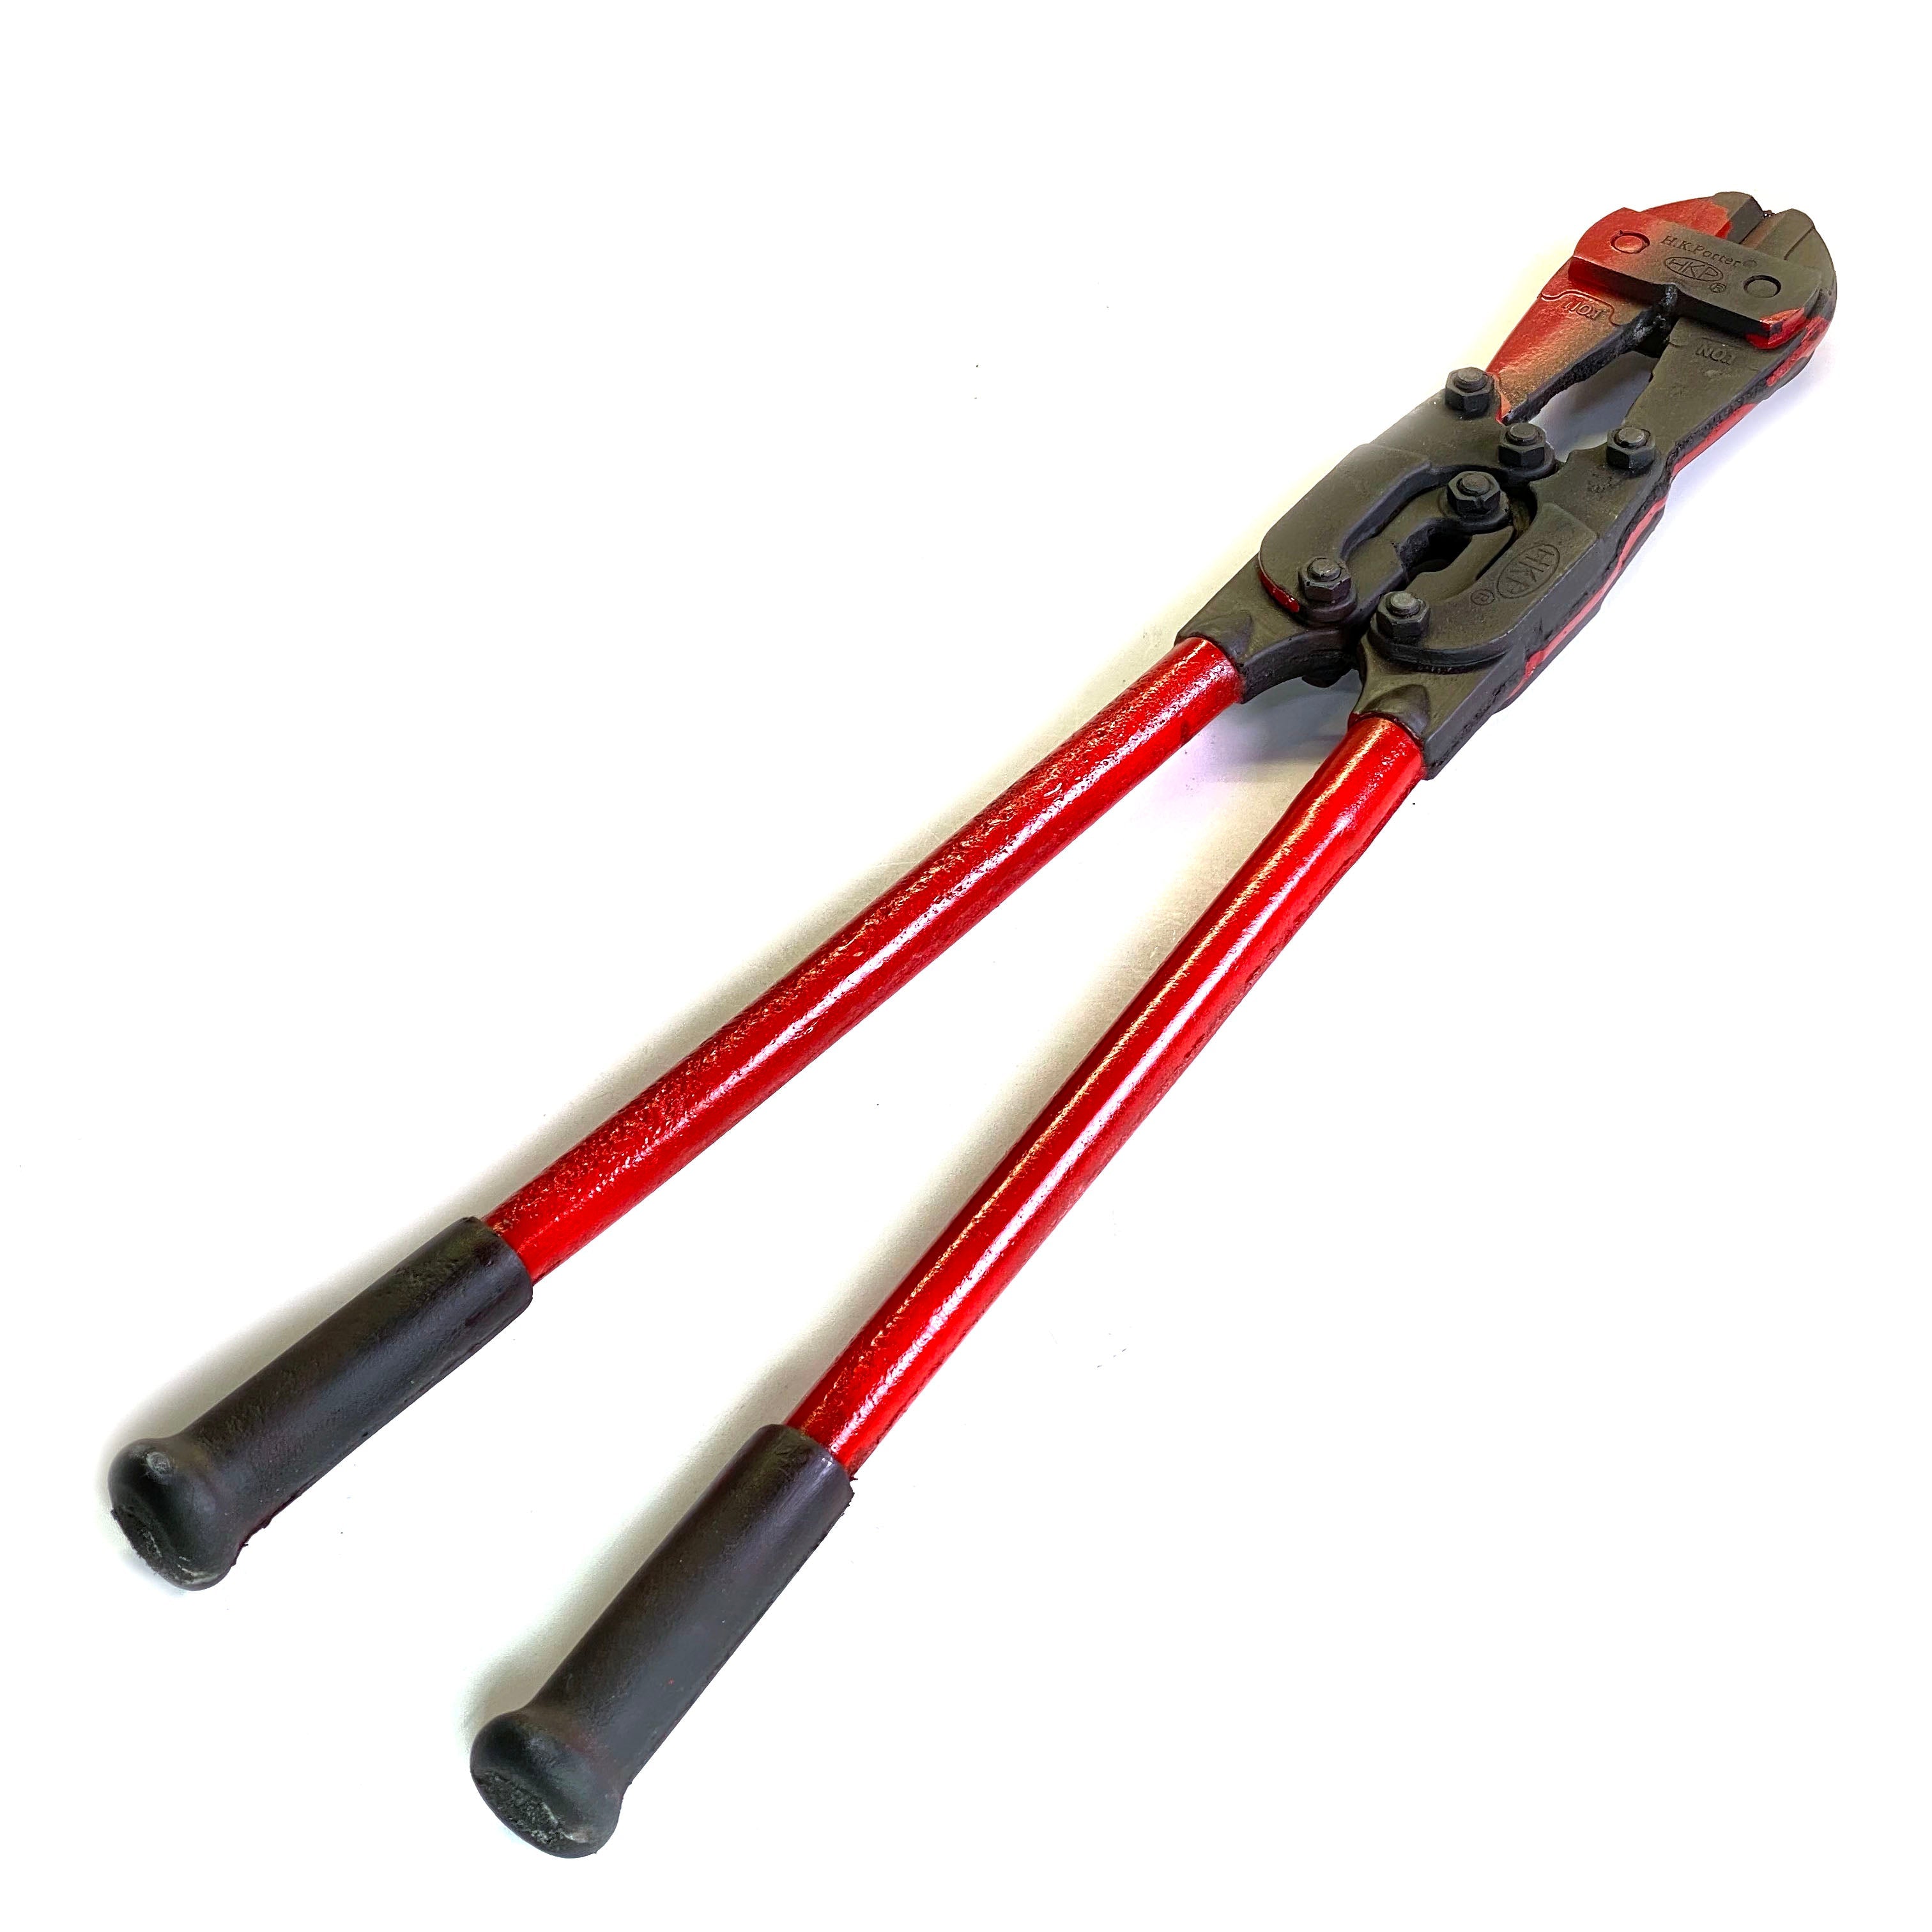 24 Inch Double Compound Bolt Cutters Foam Rubber Flexible Action Prop - BLOODY - Bloody Black and Red